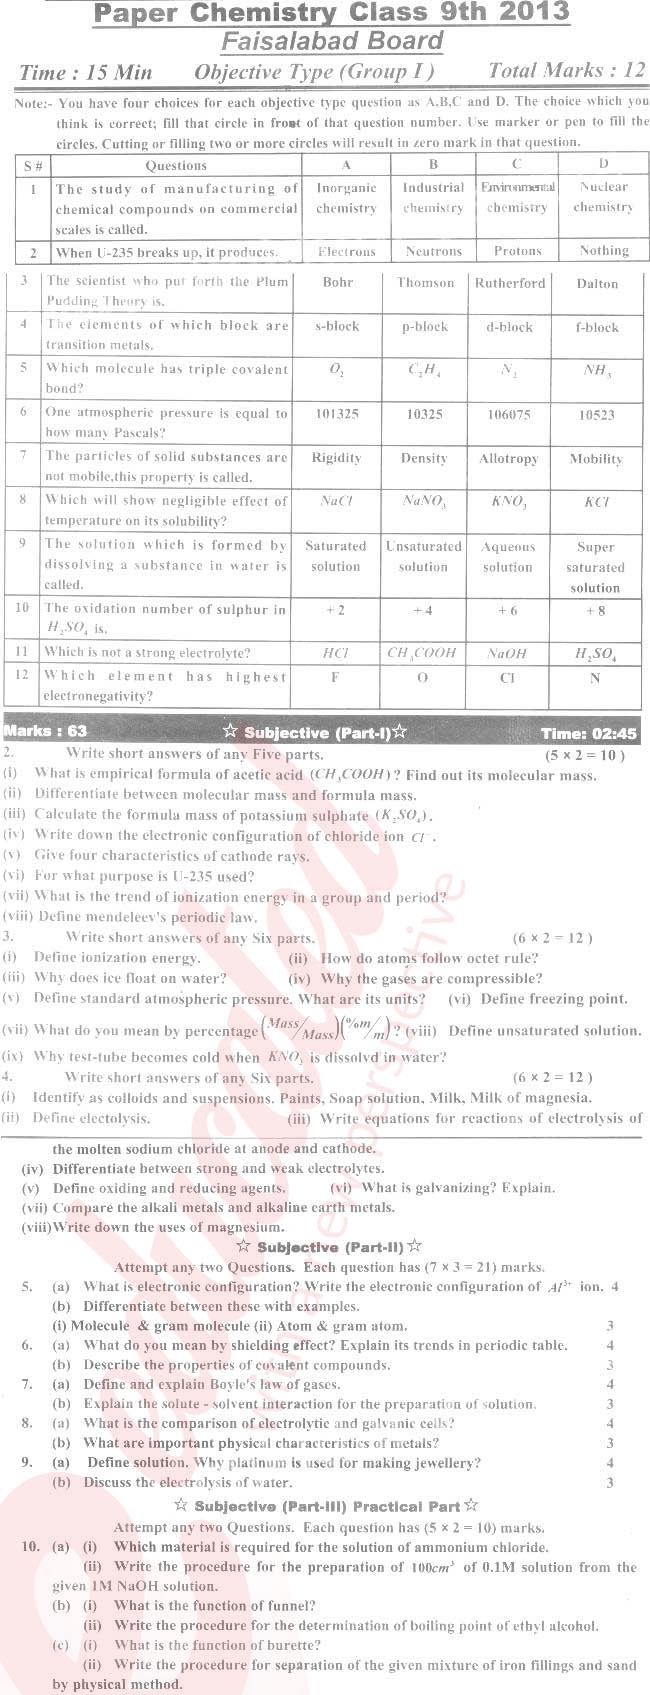 Chemistry 9th class Past Paper Group 1 BISE Faisalabad 2013